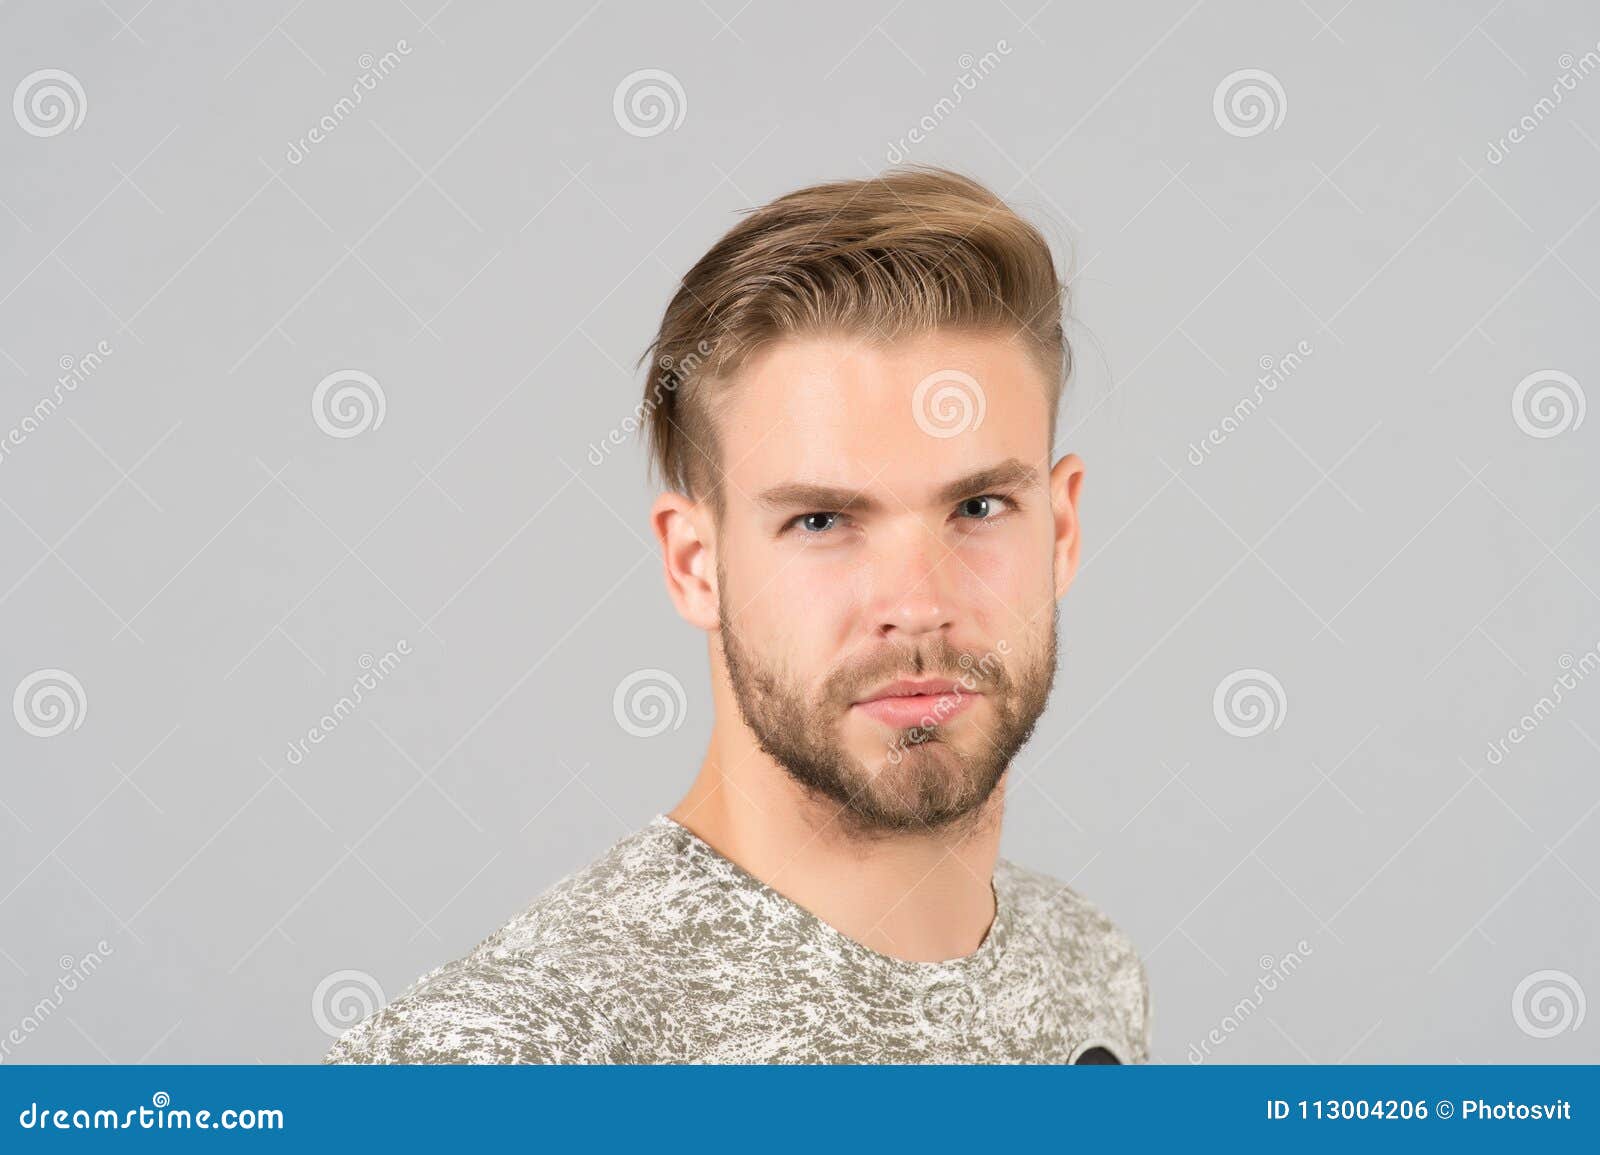 Macho with Bearded Face, Beard. Man with Blond Hair, Haircut. Grooming and  Hair Care in Beauty Salon, Barbershop Stock Photo - Image of background,  care: 113004206